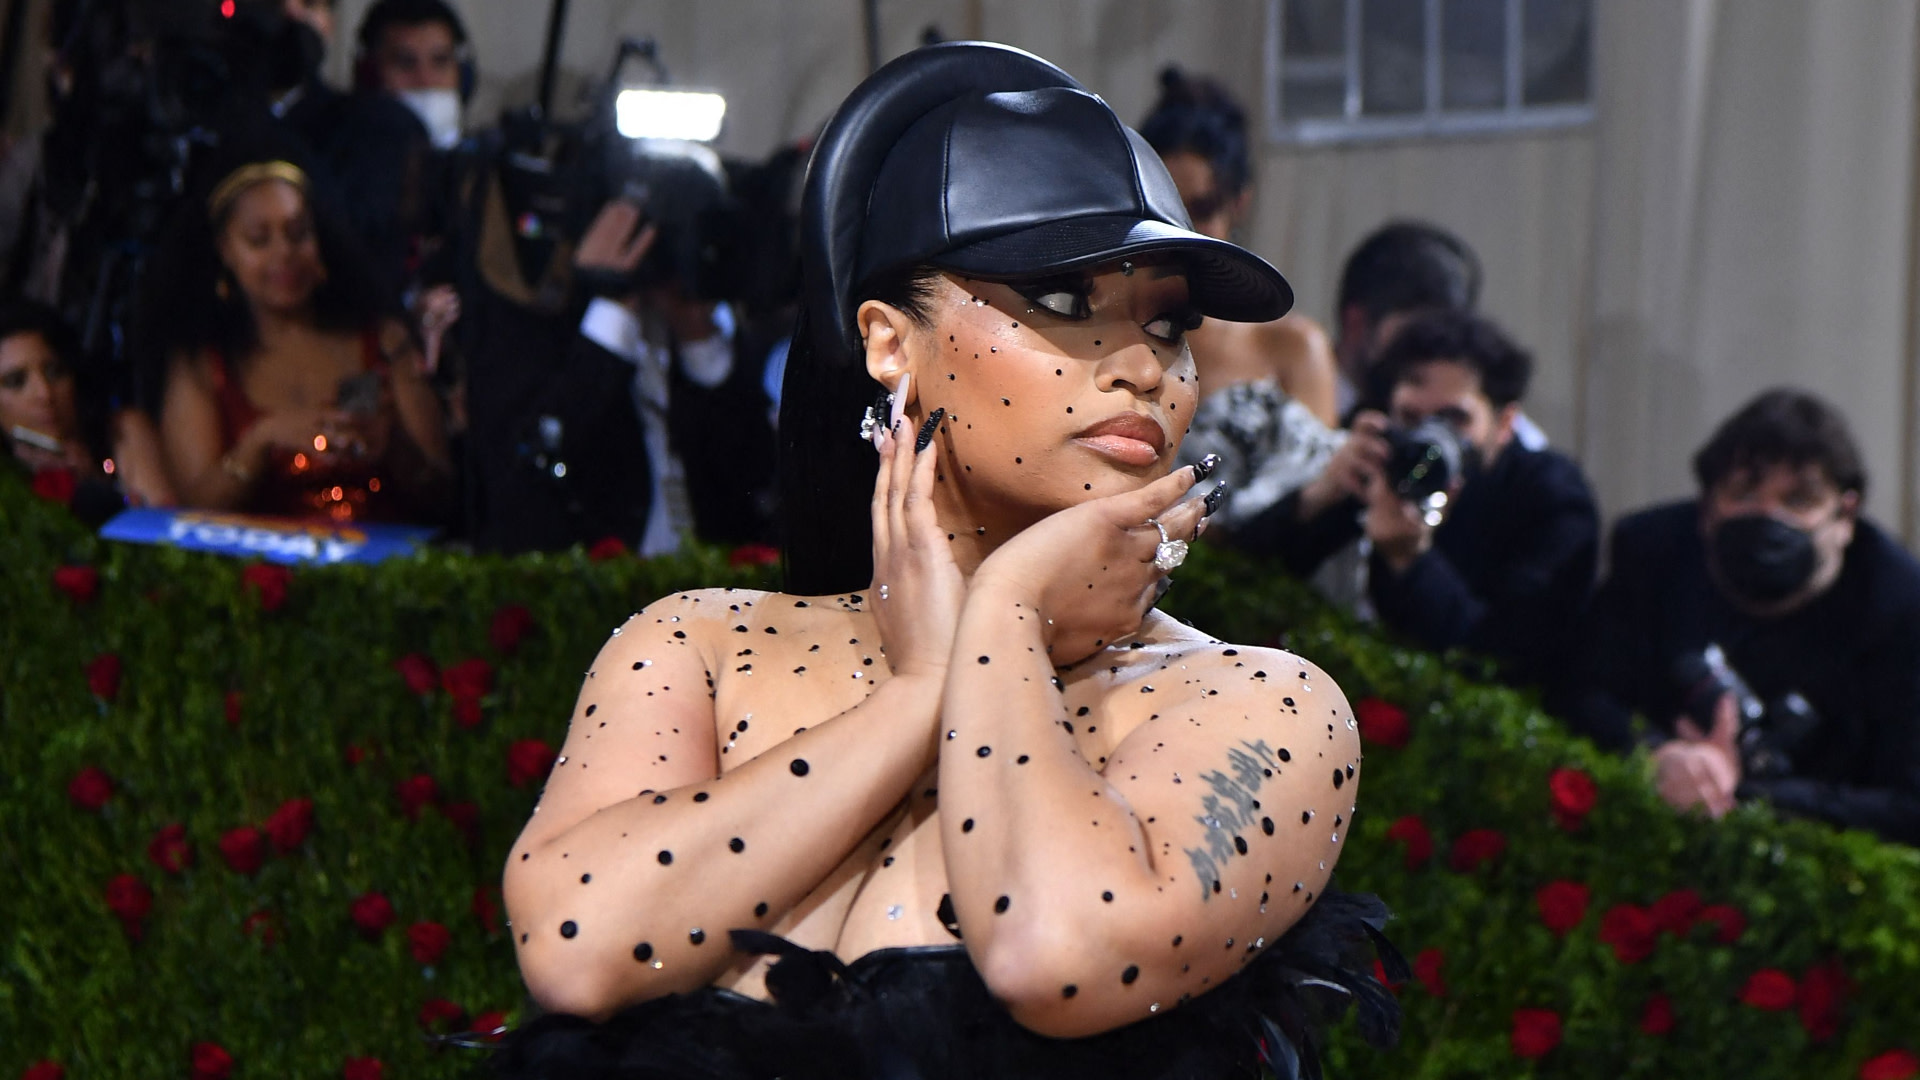 Nicki Minaj Shuts Down Claims Stemming From IG Account Purporting to Be Ex-Assistant